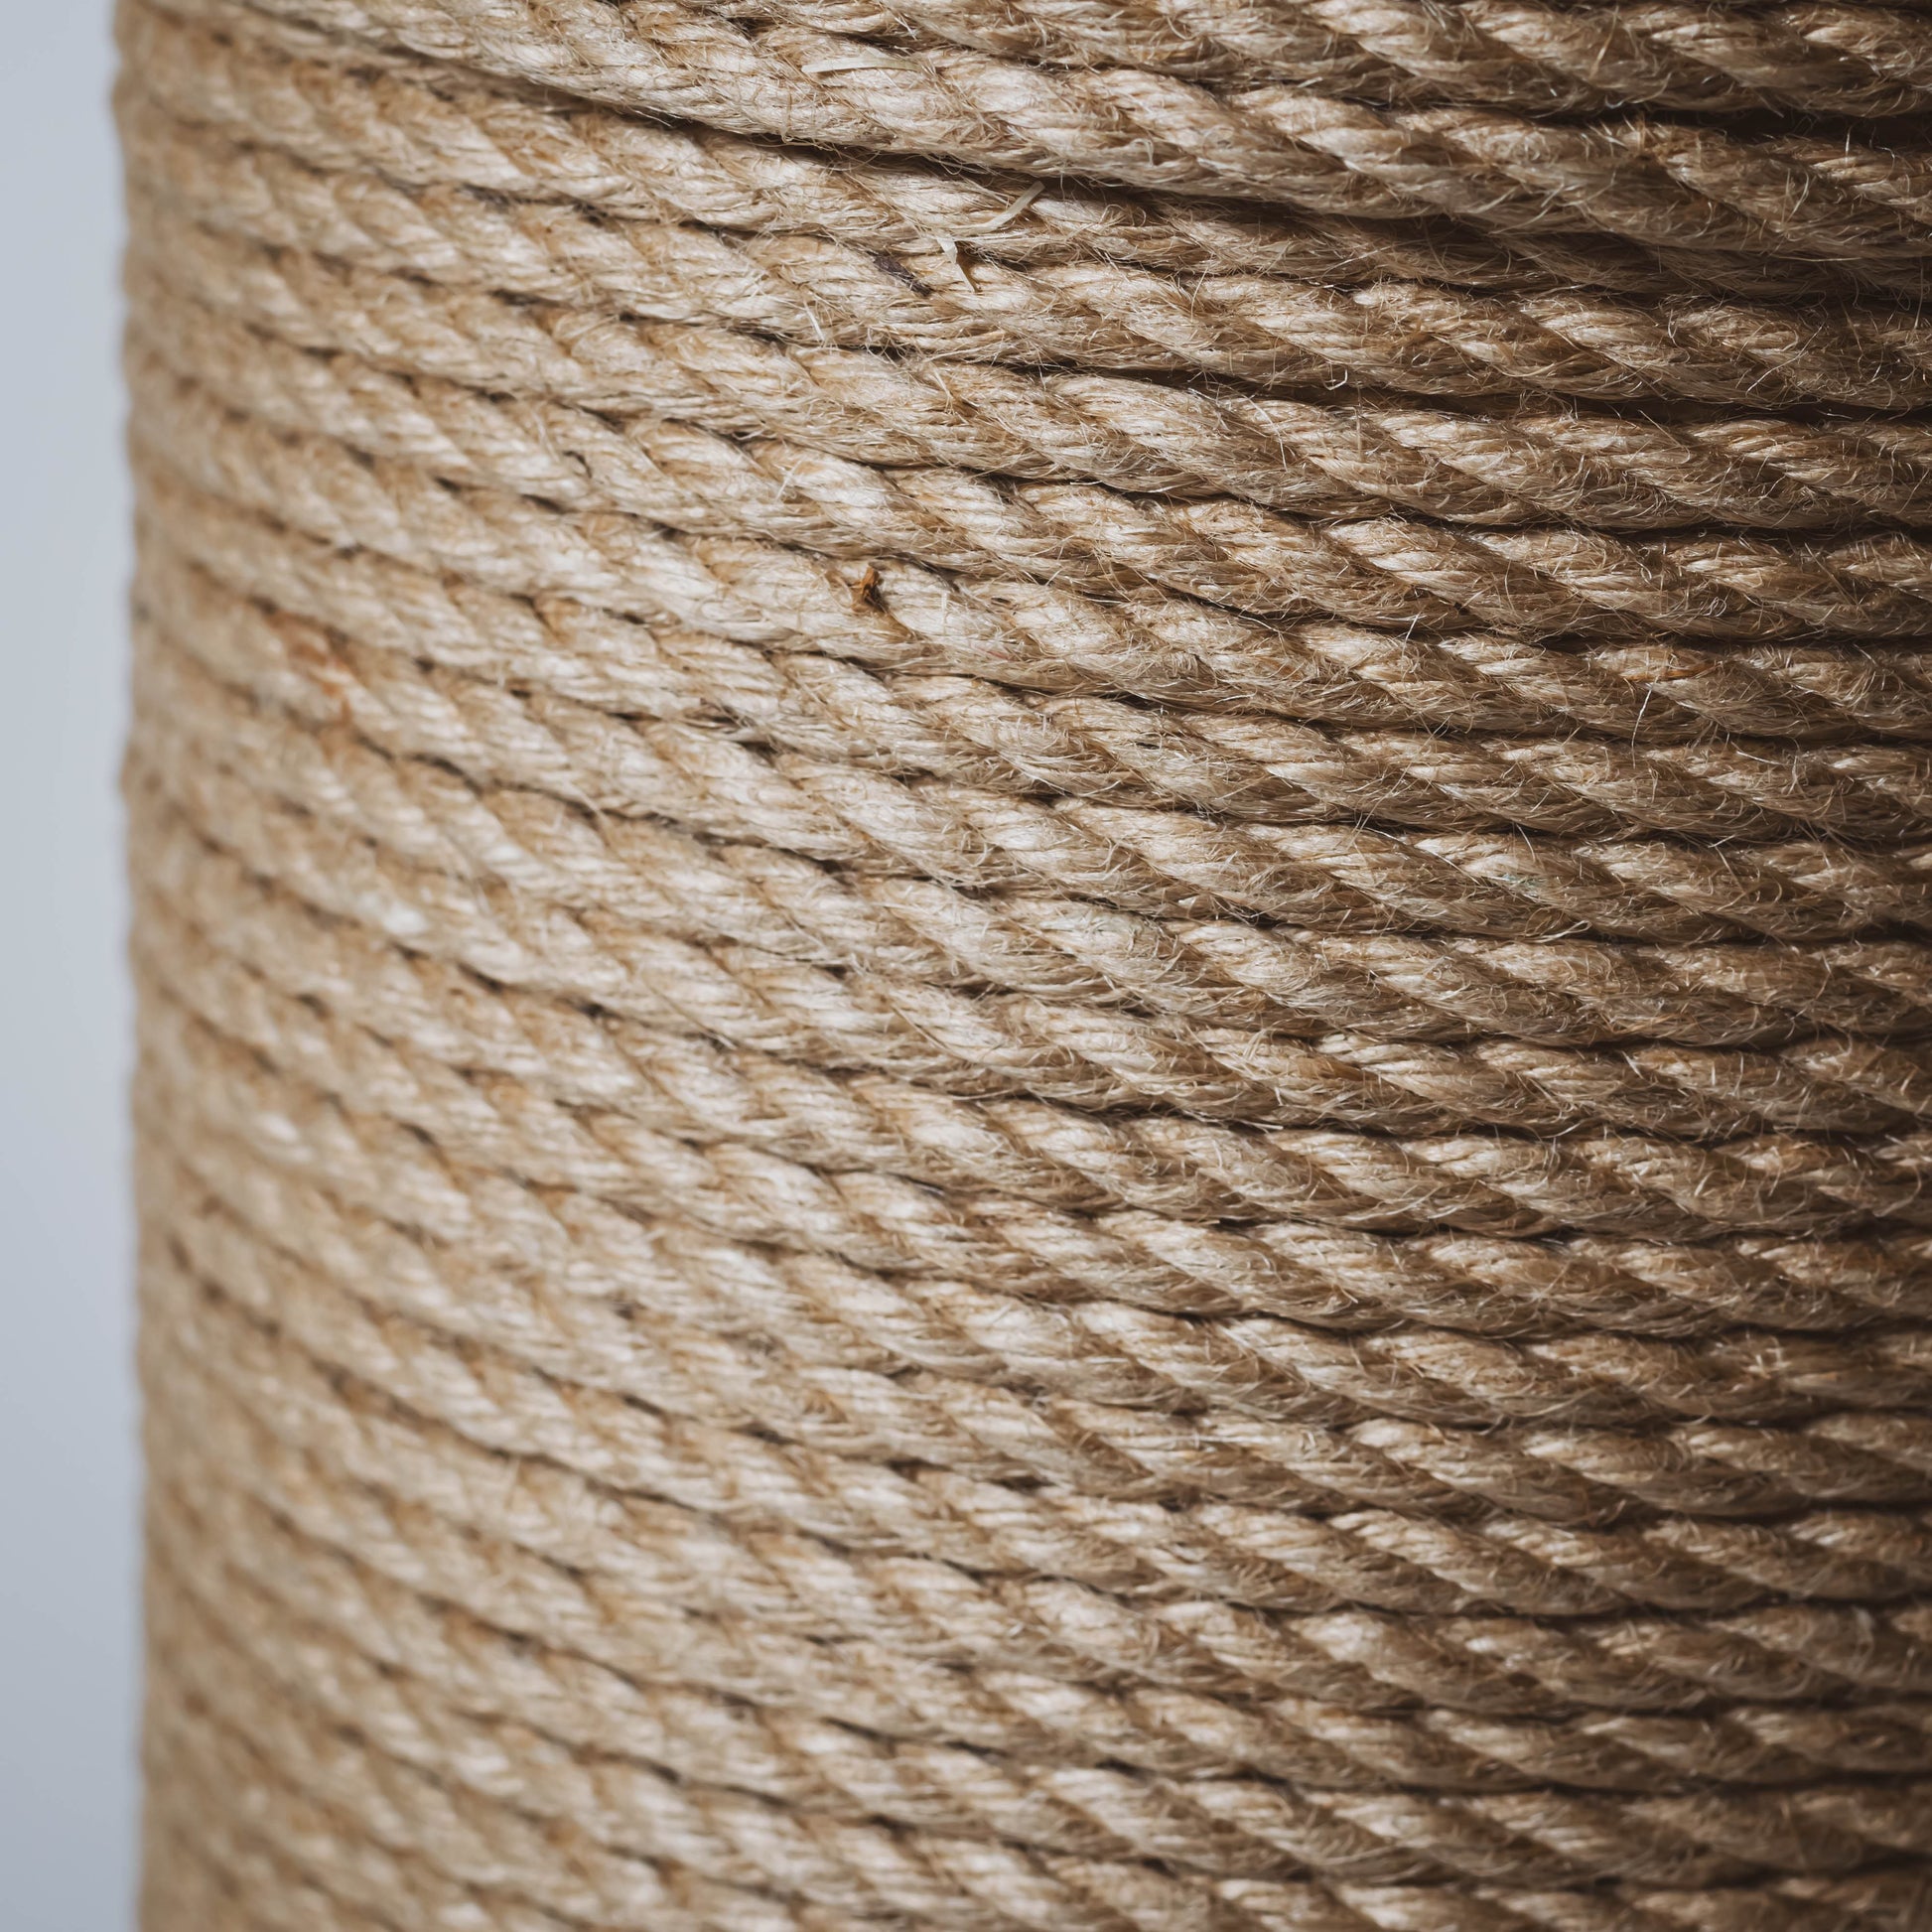 100% Natural 6mm Jute Rope for Shibari | Soft and Durable 26.25 feet Long  Ropes | A Complete Shibari Kit for Beginners with Jute Rope, Drawstring  Bag